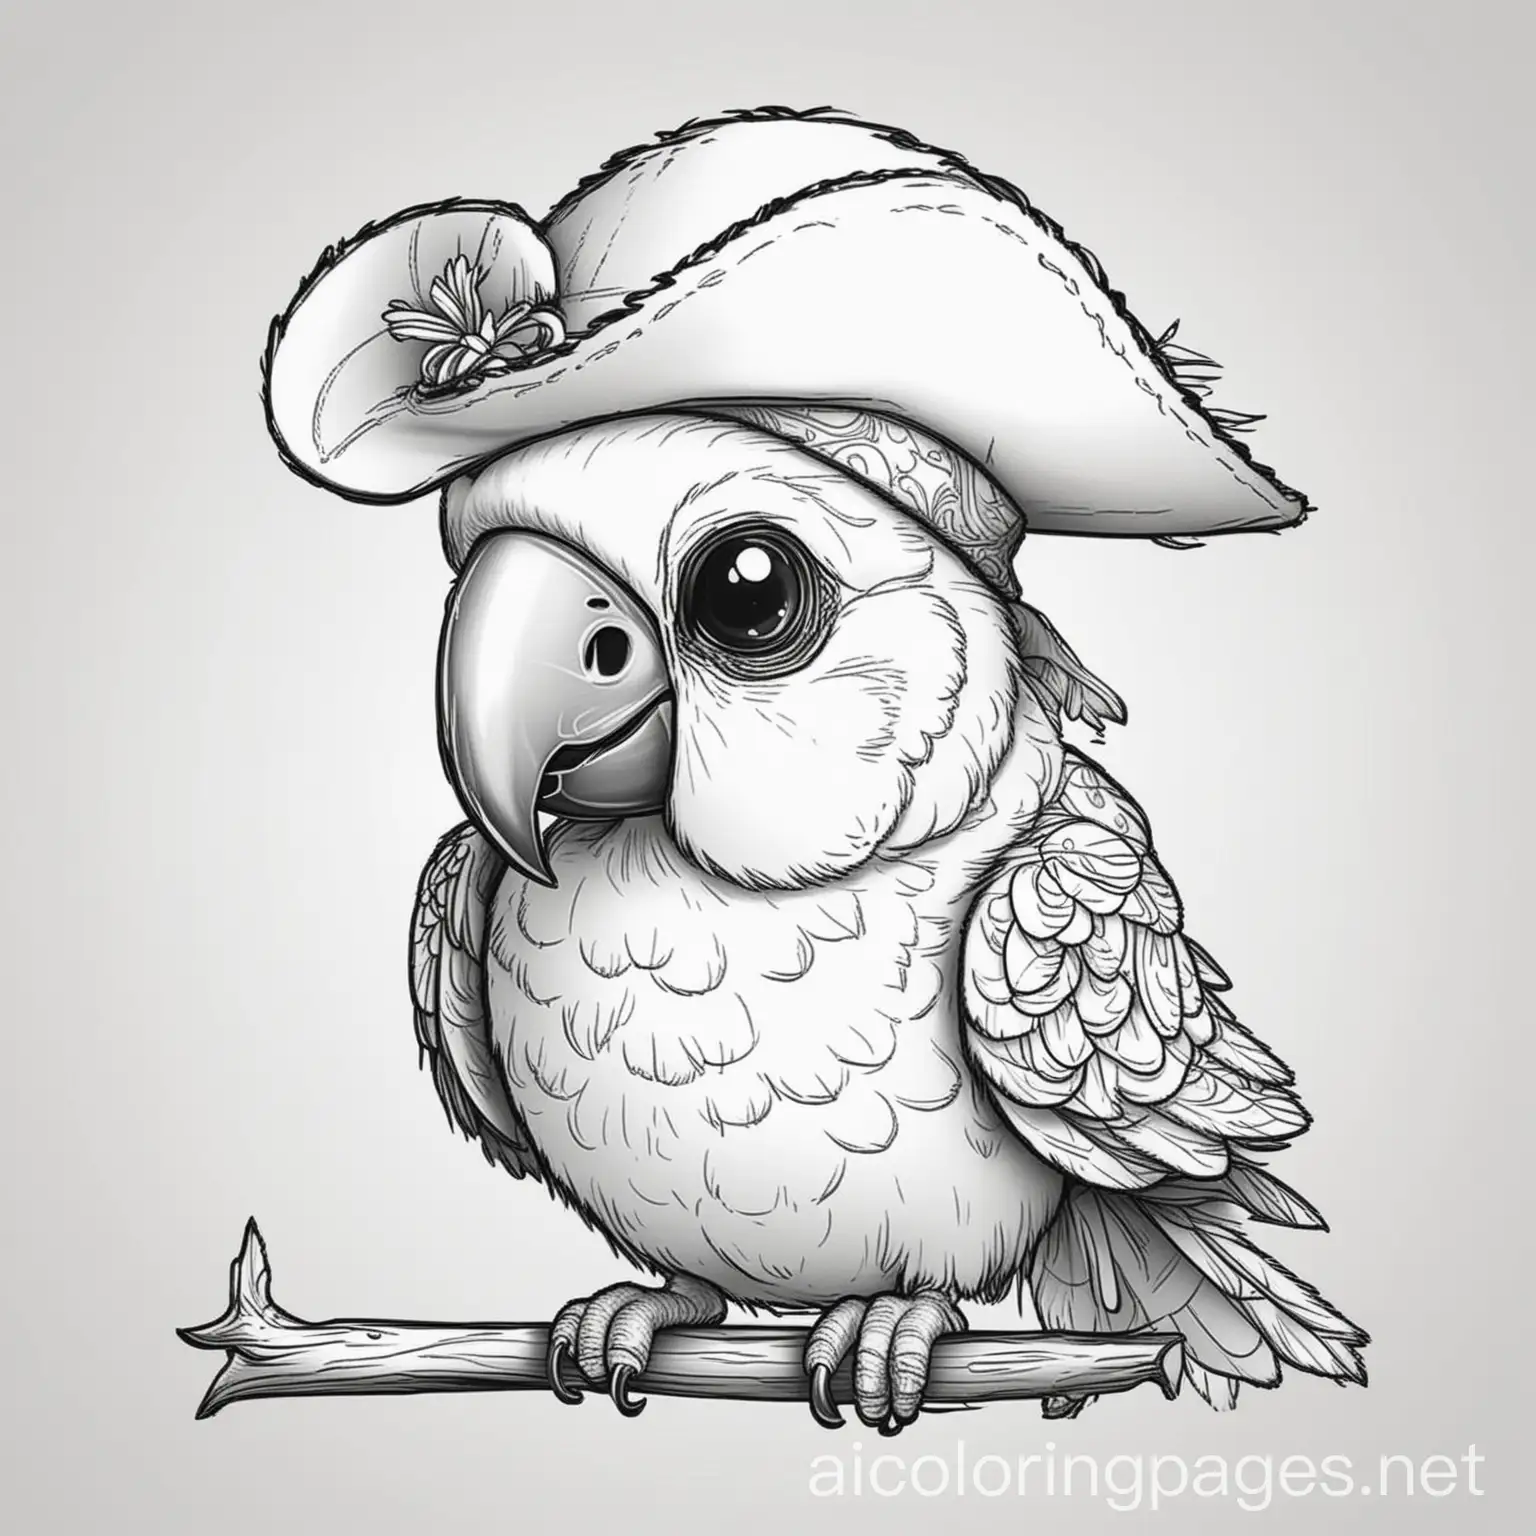 Cute Parrot with a Tiny Pirate Hat, Coloring Page, black and white, line art, white background, Simplicity, Ample White Space. The background of the coloring page is plain white to make it easy for young children to color within the lines. The outlines of all the subjects are easy to distinguish, making it simple for kids to color without too much difficulty